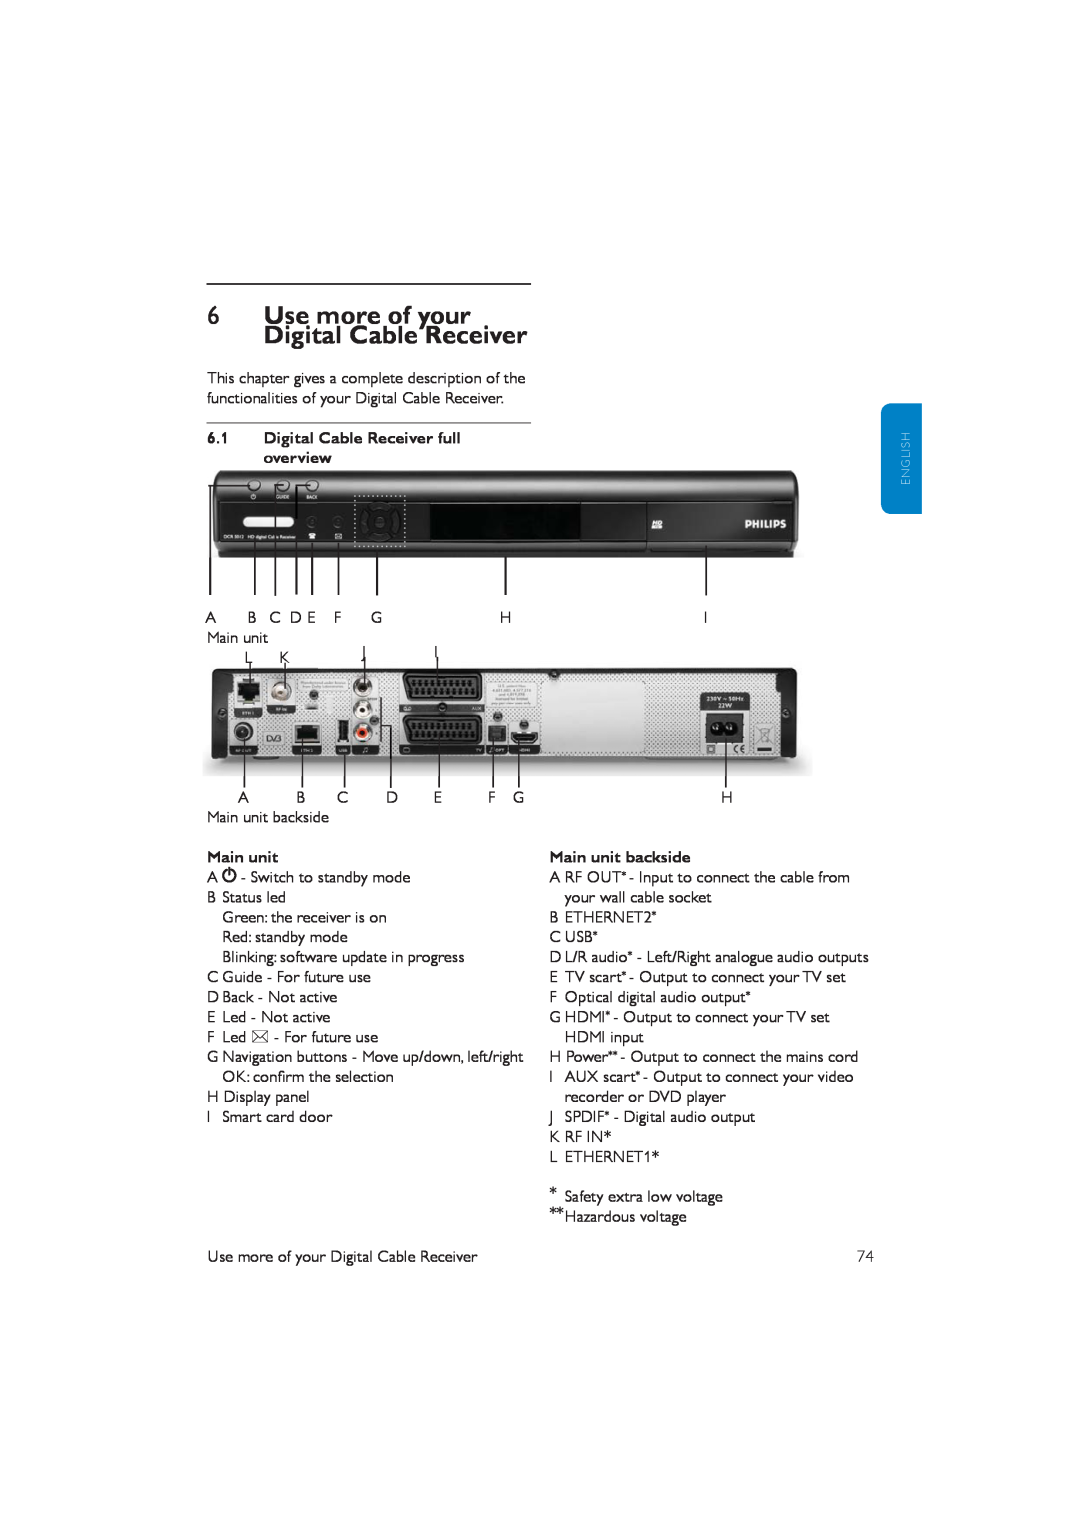 Philips DCR5012 manual 6Use more of your Digital Cable Receiver, 6.1Digital Cable Receiver full overview, Main unit 